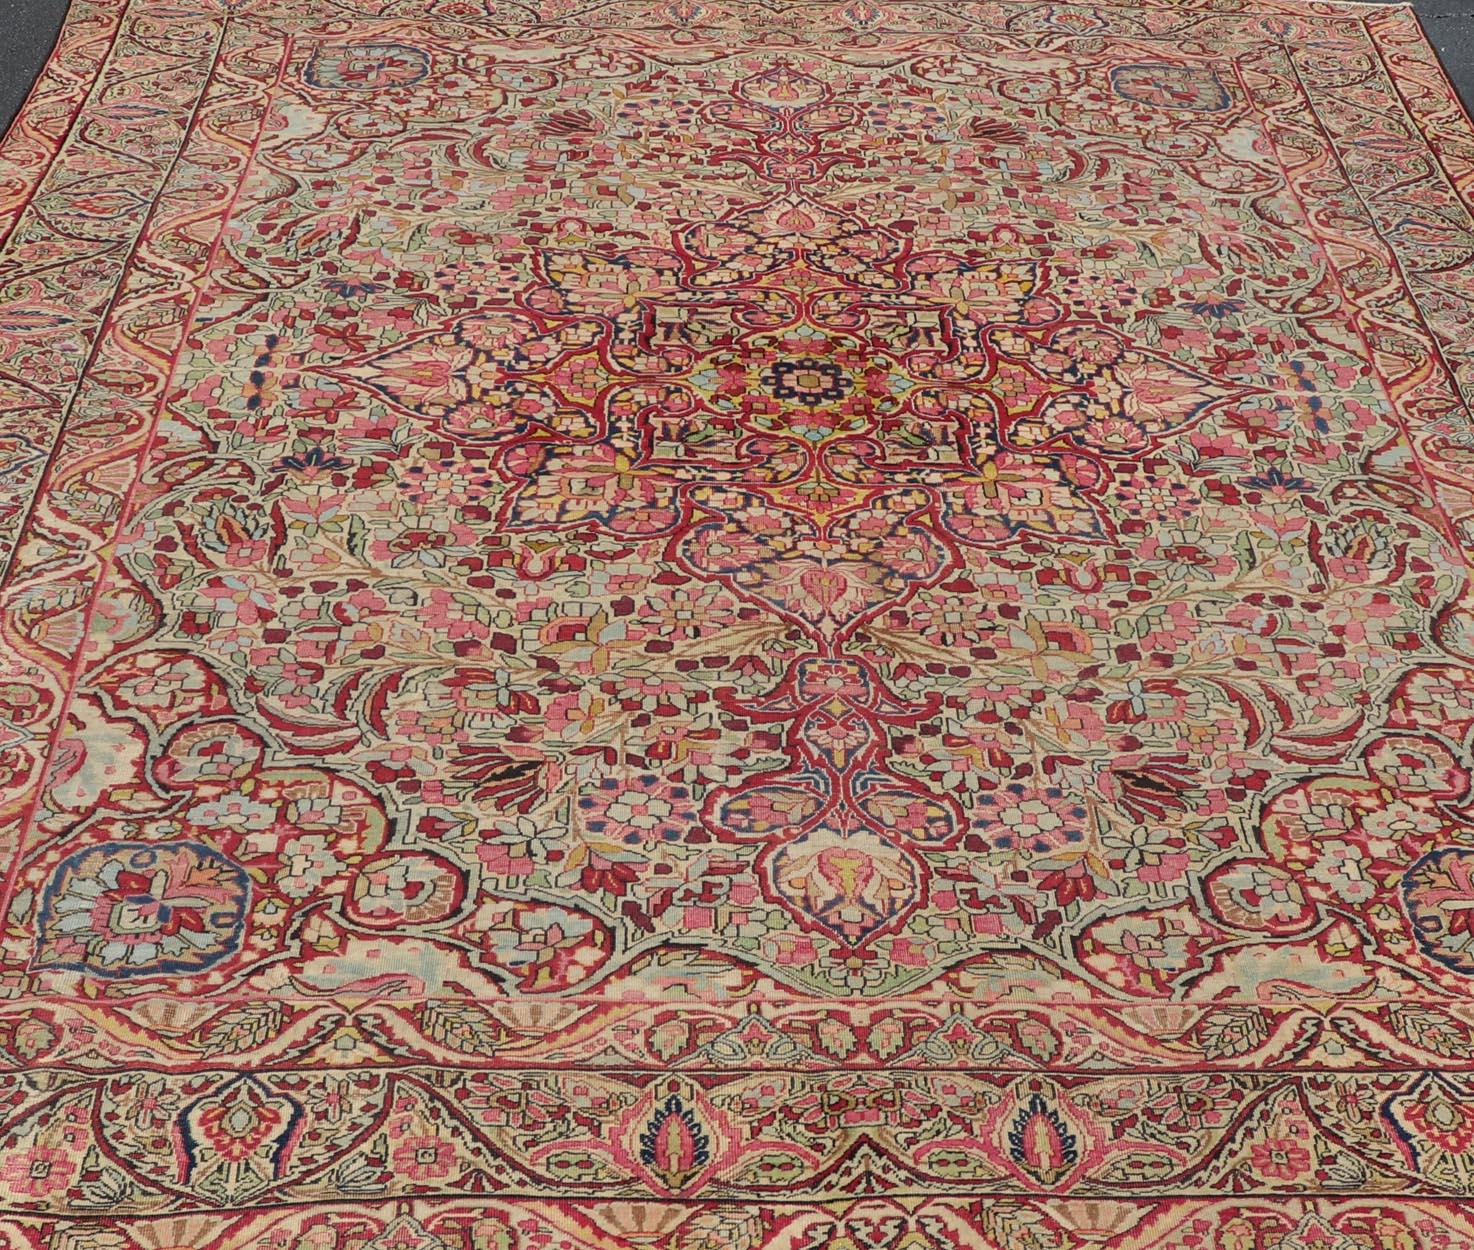 Antique Persian Lavar Kerman Rug With Intricate Medallion Design.  Keivan Woven Arts / Rug/C-0715, Laver Kerman, Antique Kerman, Antique Persian

Measures: 9'5 x 11'2

This antique Kerman Lavar rug bears a remarkably intricate floral design with a